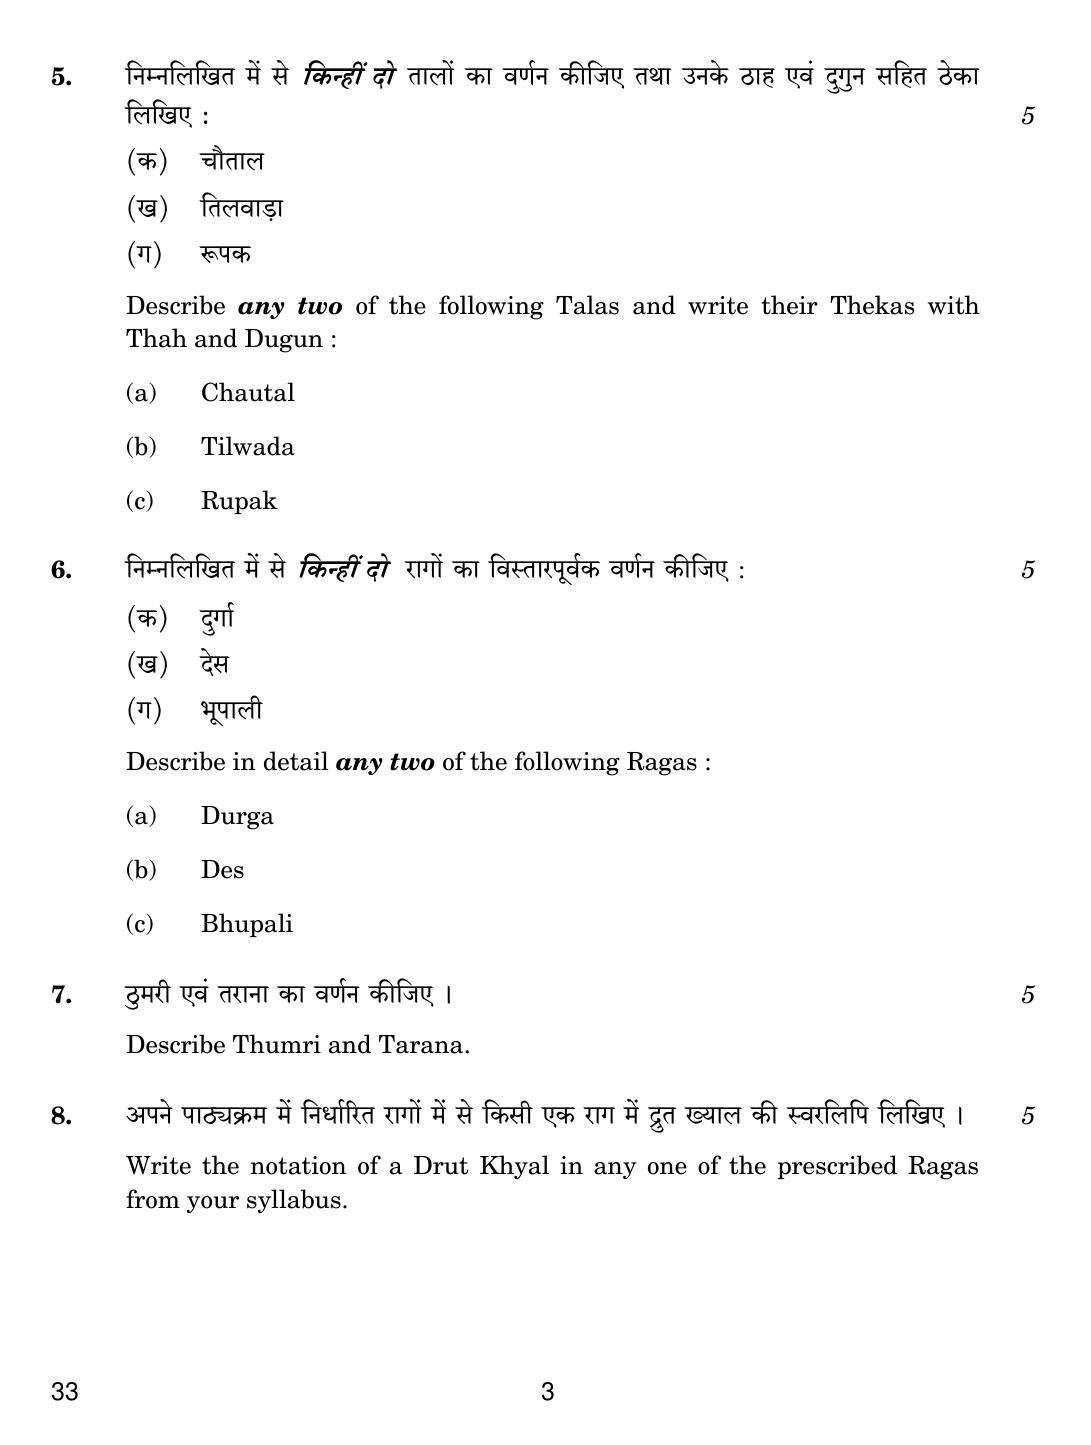 CBSE Class 10 33 HIND. MUSIC VOCAL 2019 Compartment Question Paper - Page 3